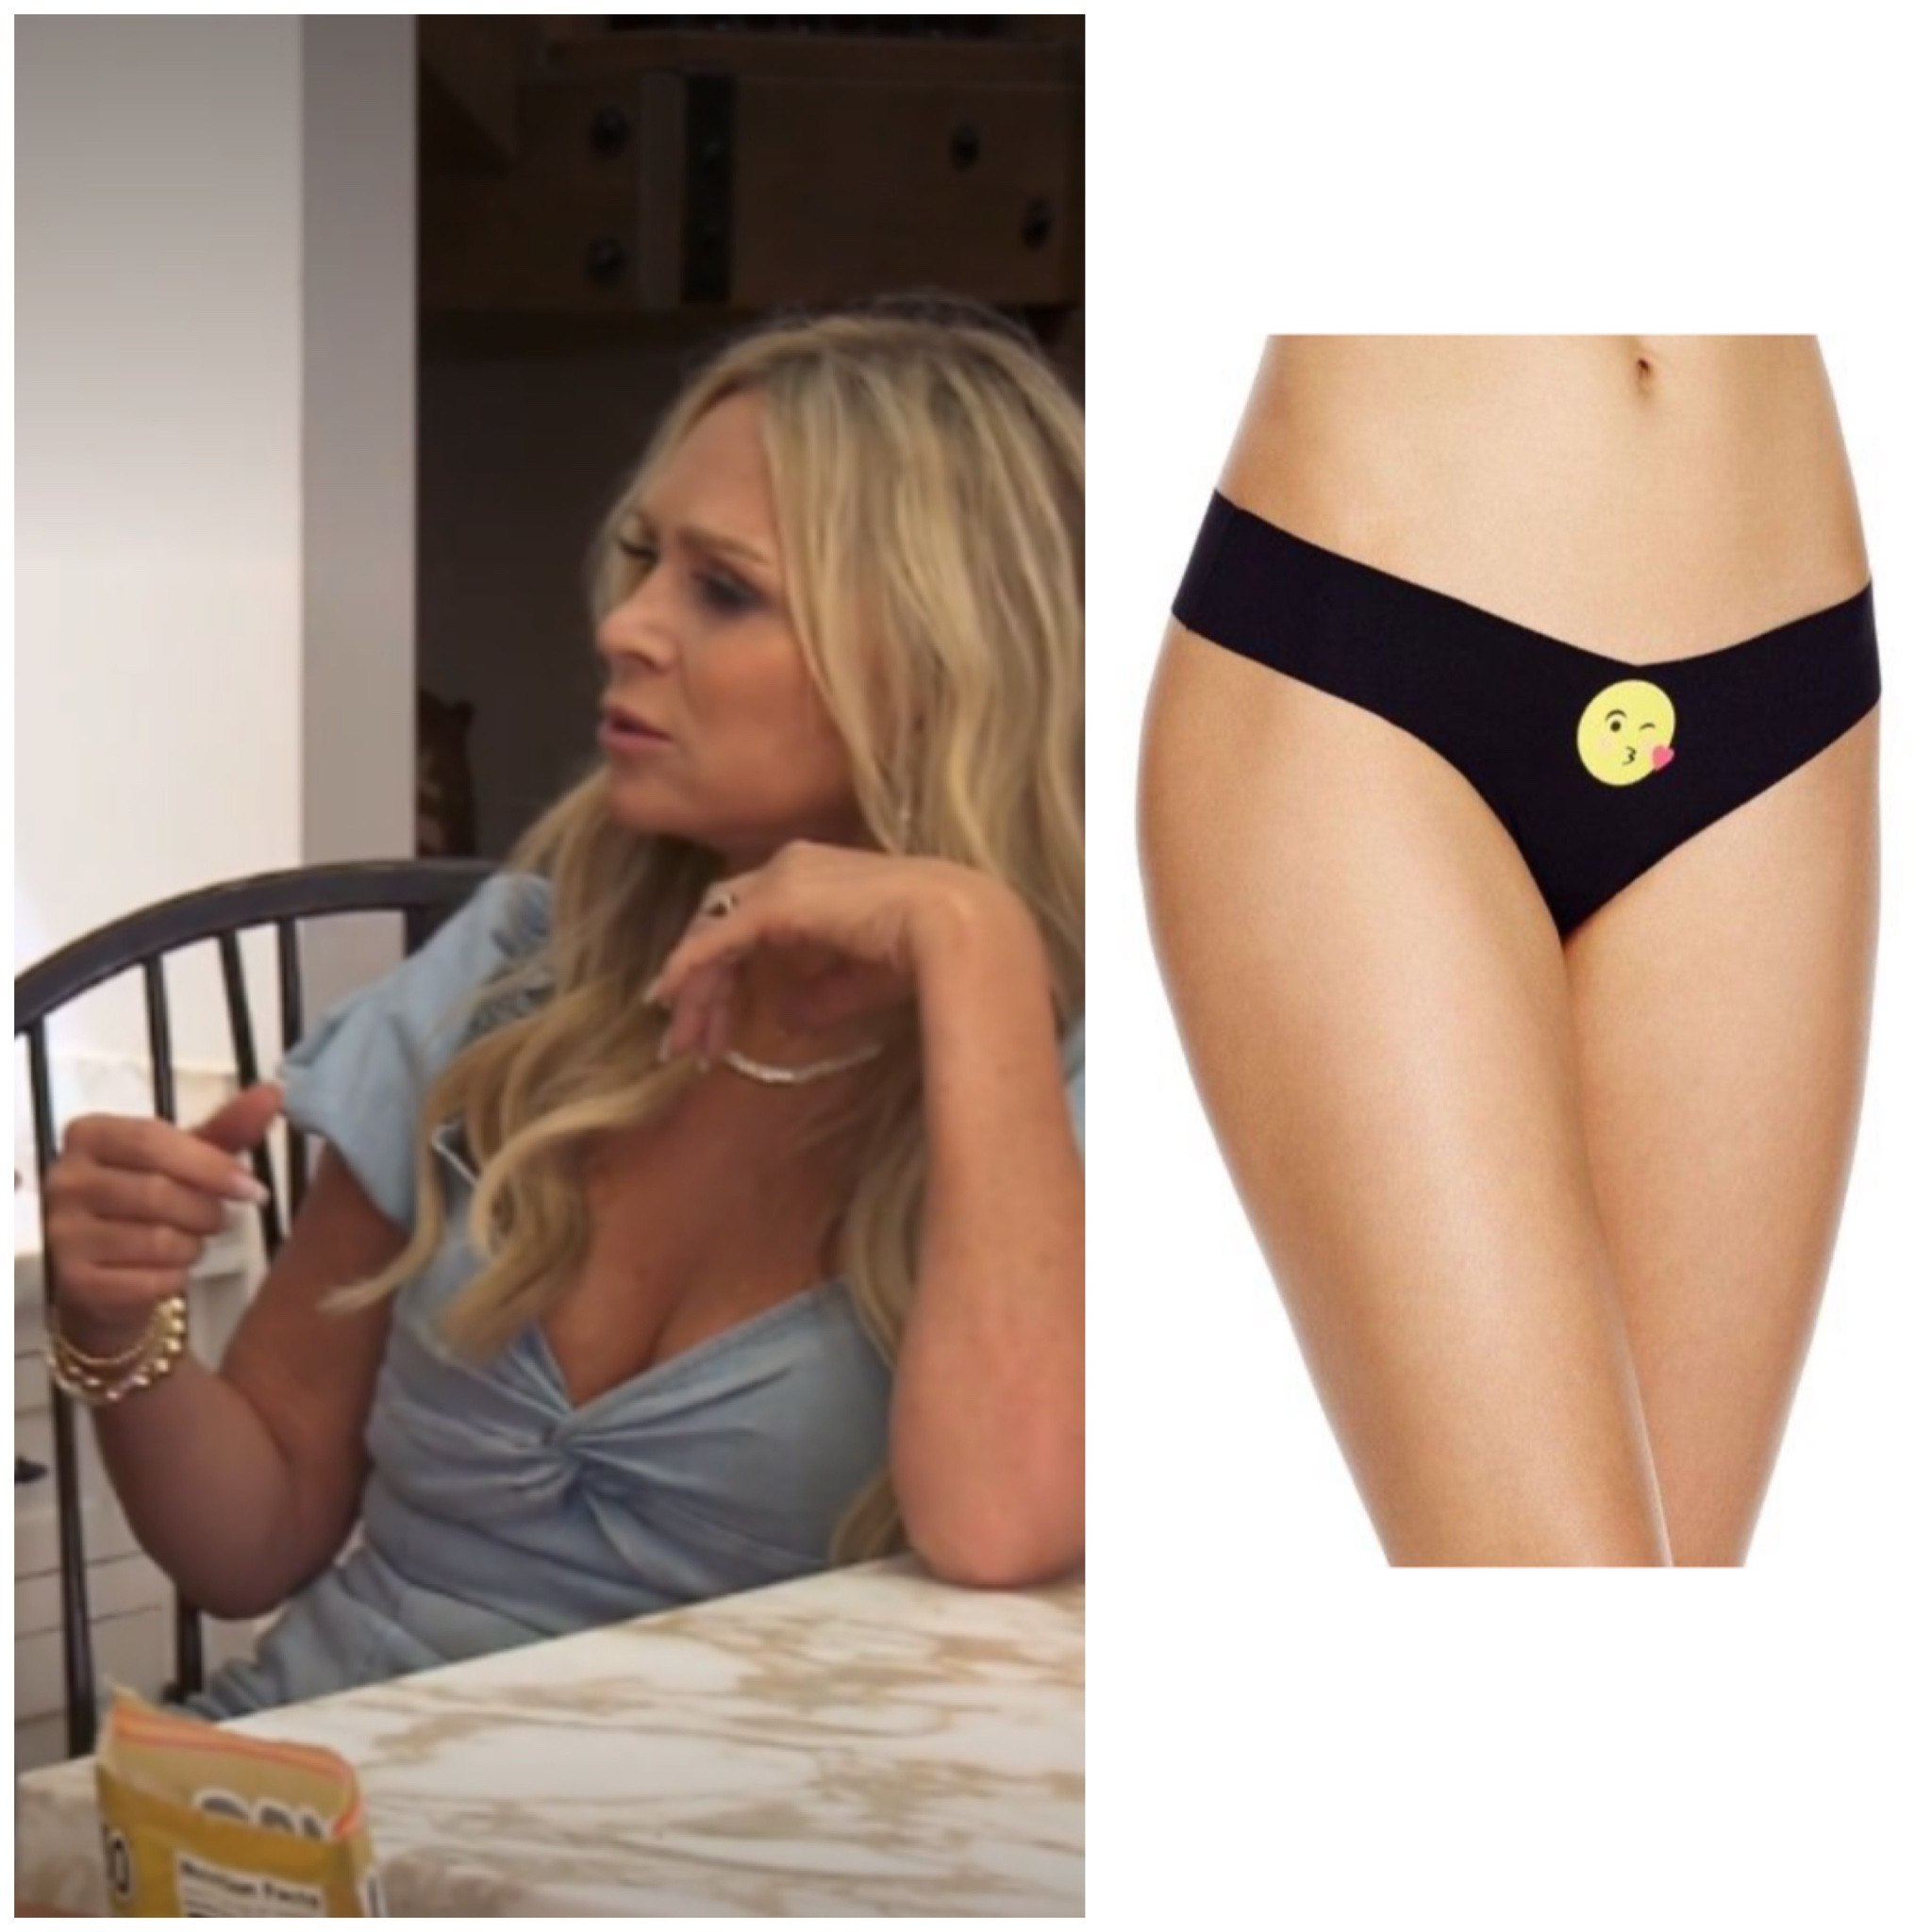 LeoLines - This bra and panty set can be trimmed in the color of